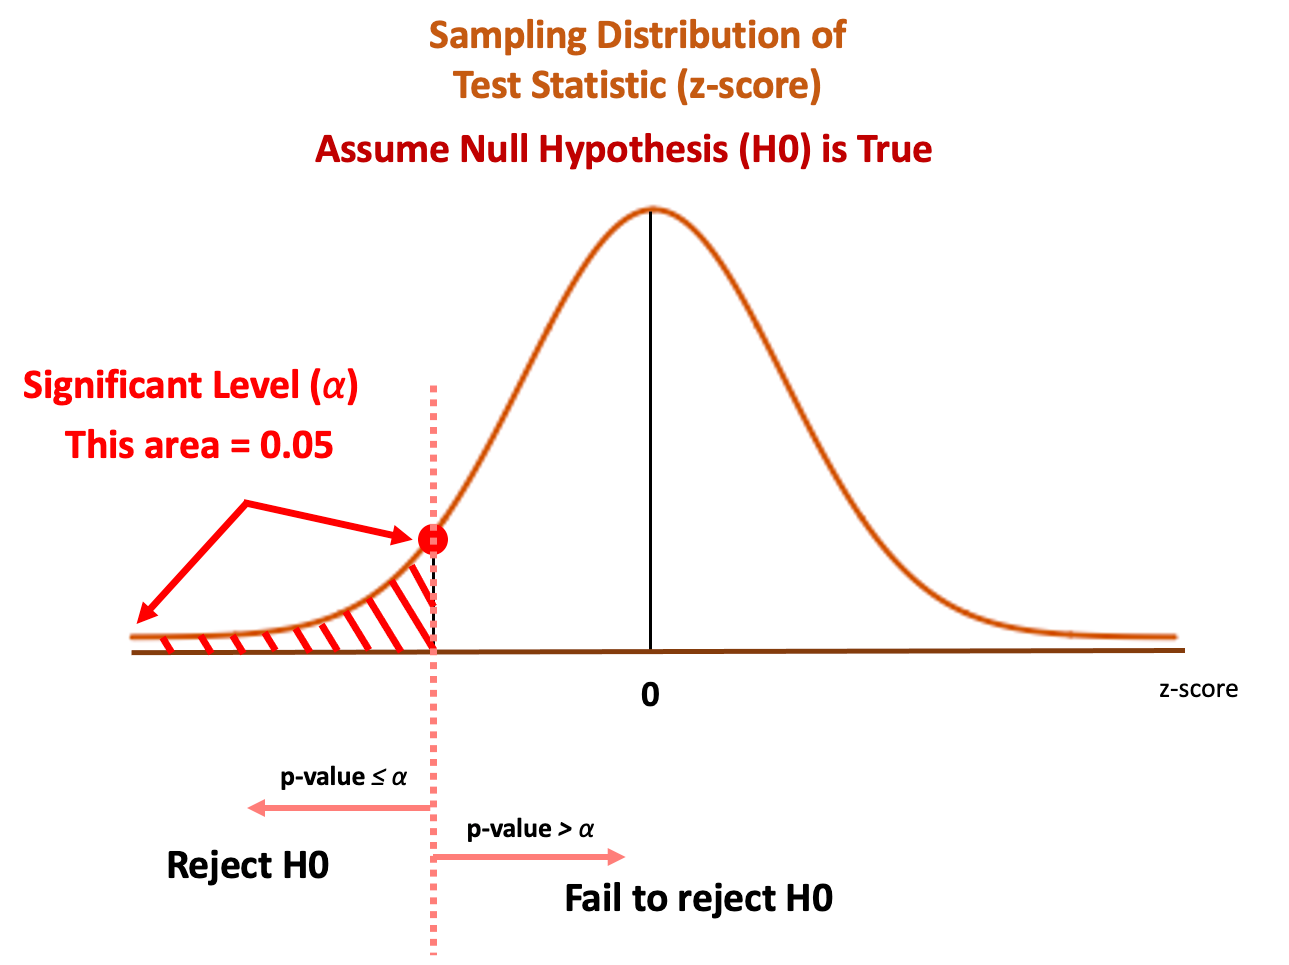 null hypothesis p value 0.05